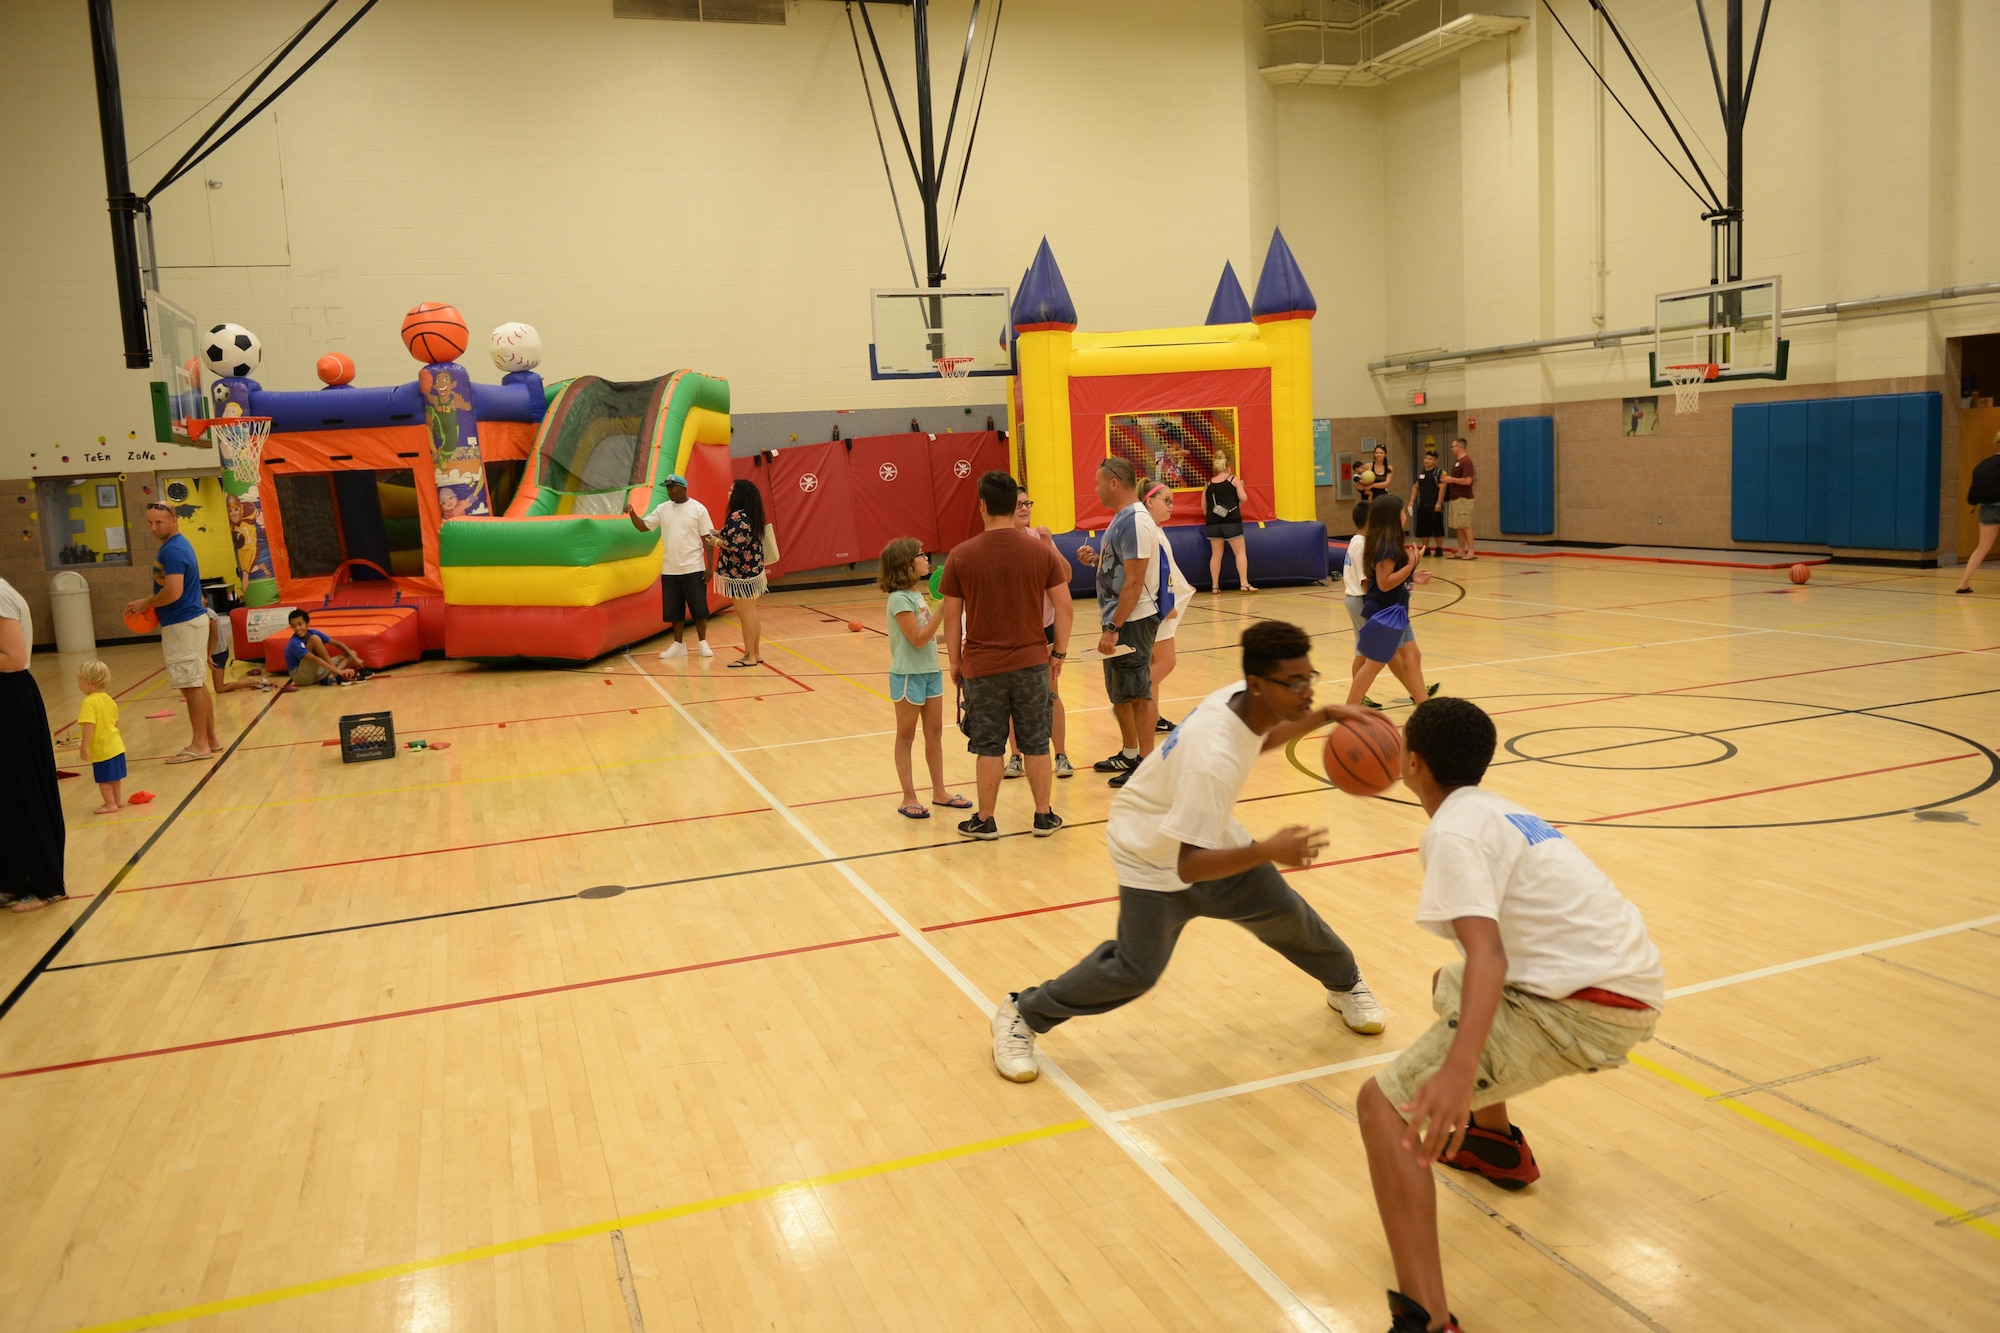 Families play in the Sheppard Air Force Base youth center gym during the summer family picnic, July 20, 2016. The summer family picnic had several booths from various helping agencies to help introduce and welcome new families to the base. (U.S. Air Force photo by Senior Airman Kyle E. Gese/Released)